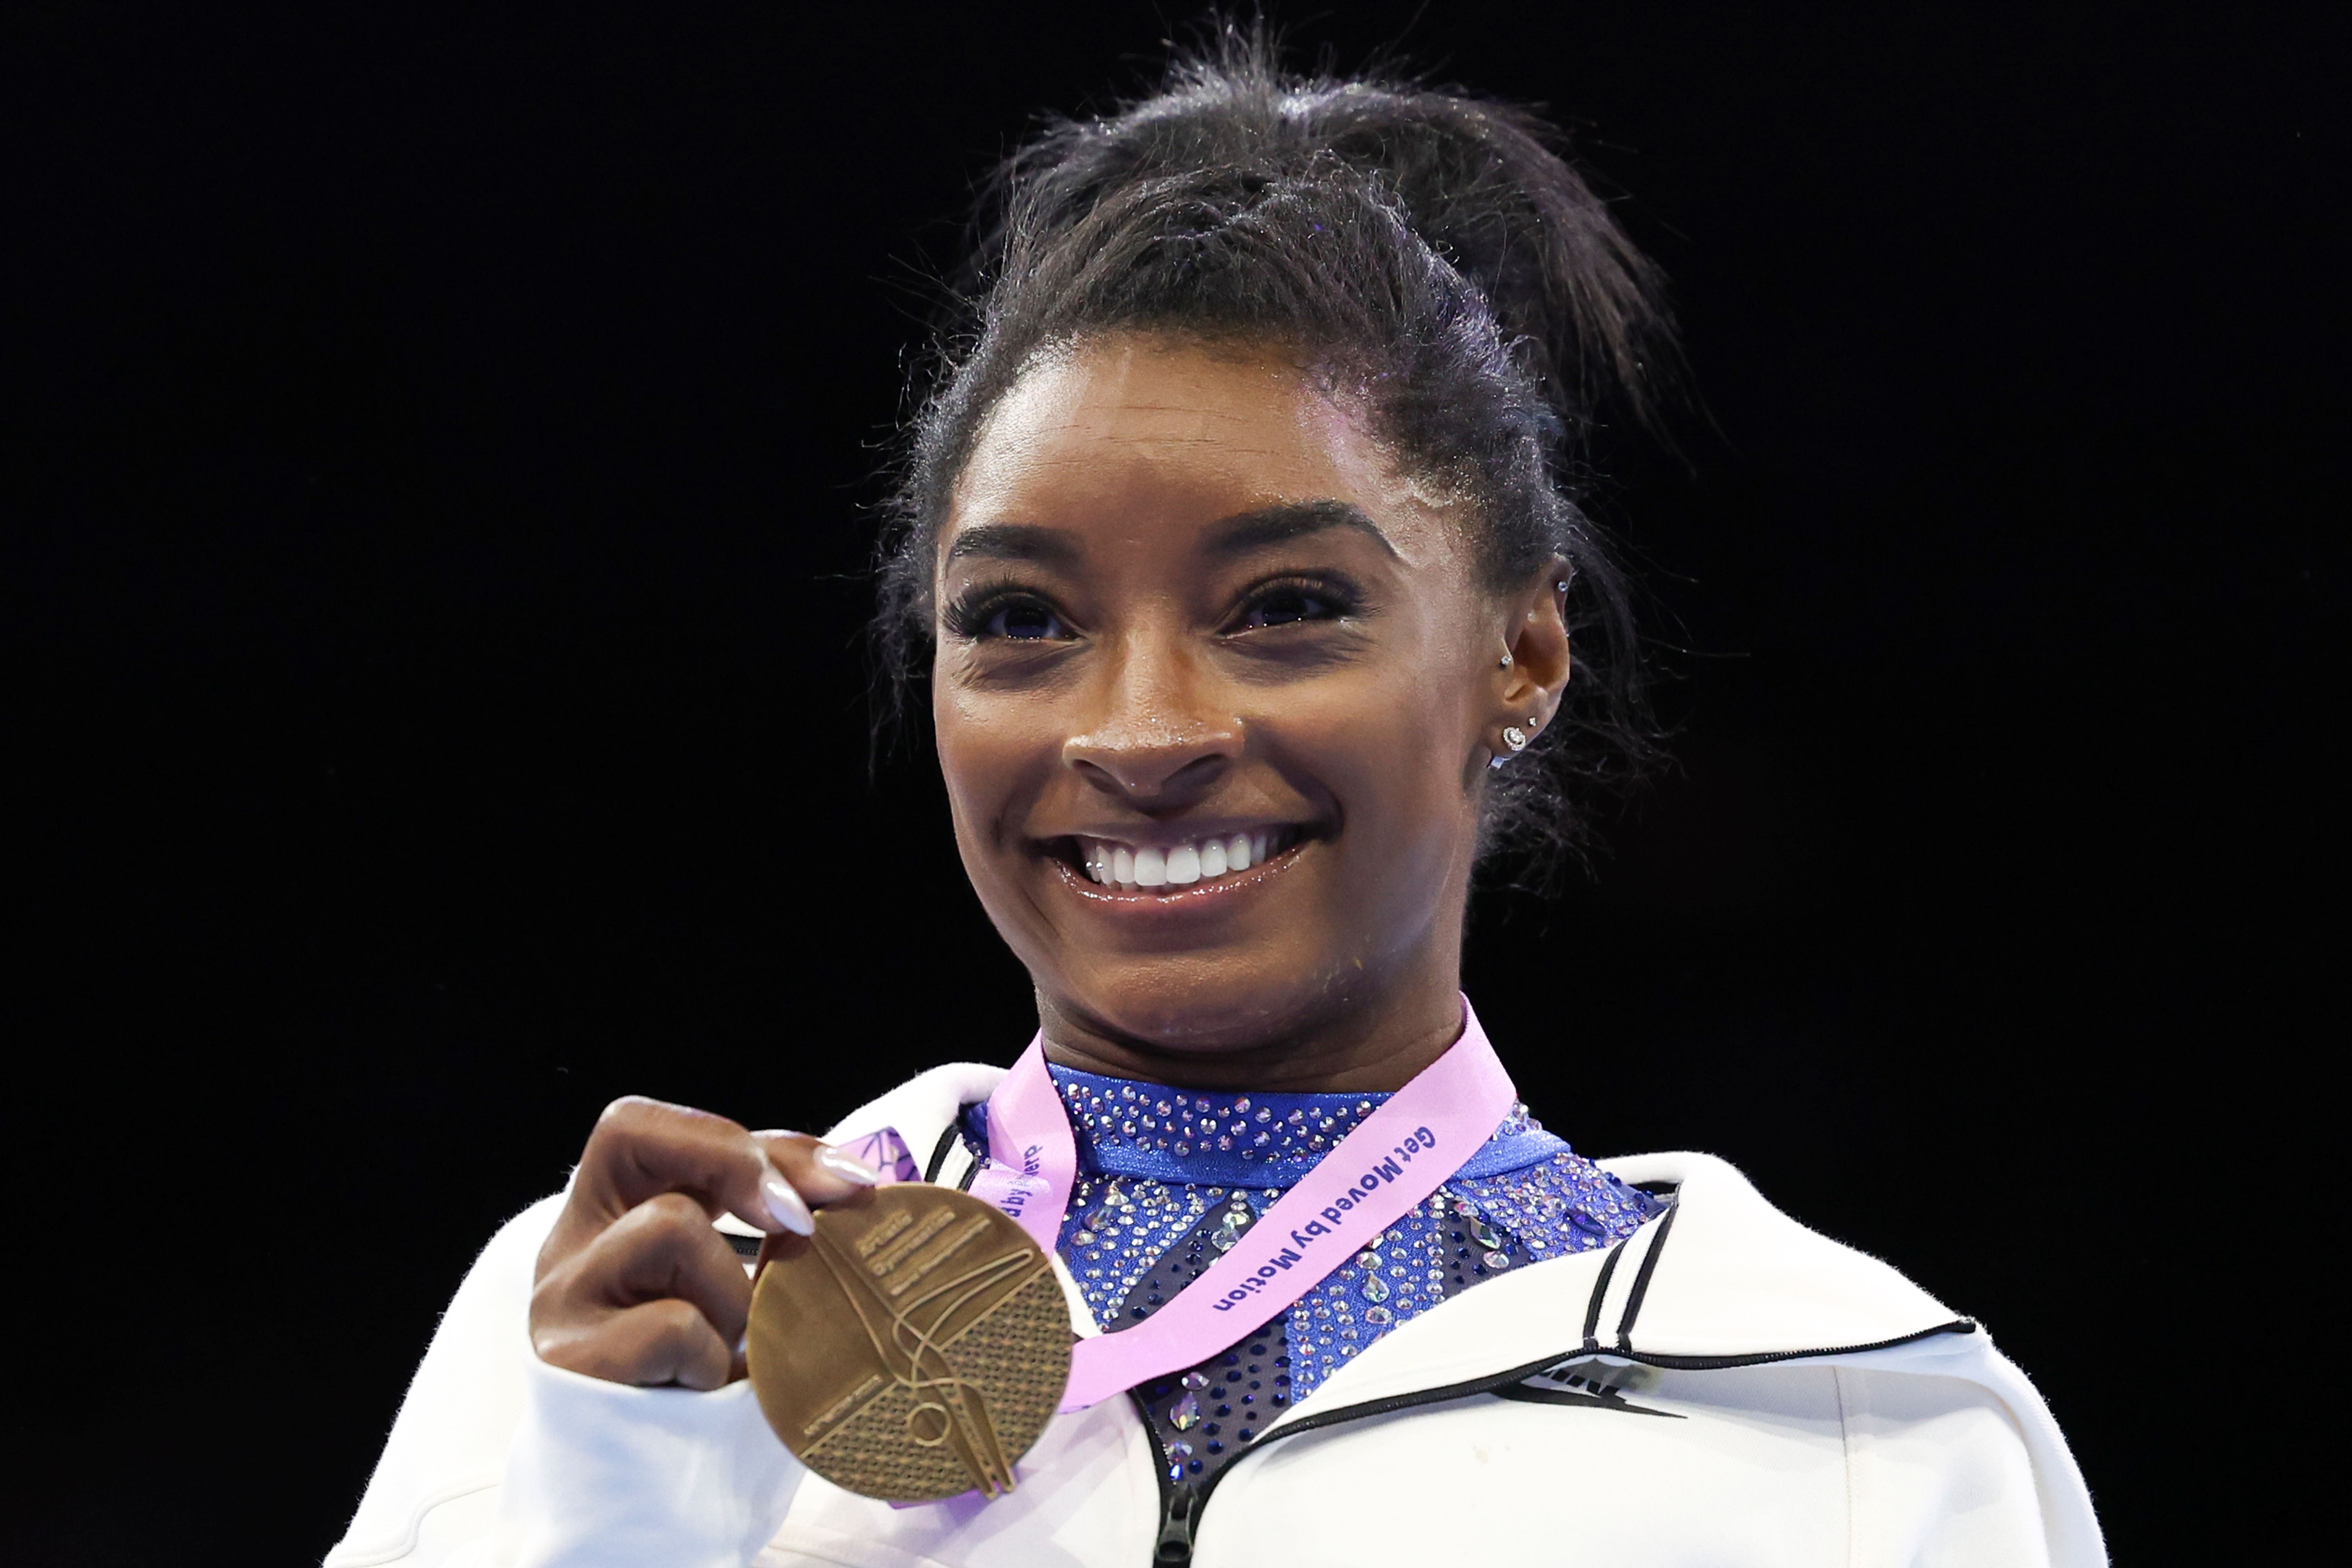 Simone Biles becomes most decorated gymnast in history with 34th